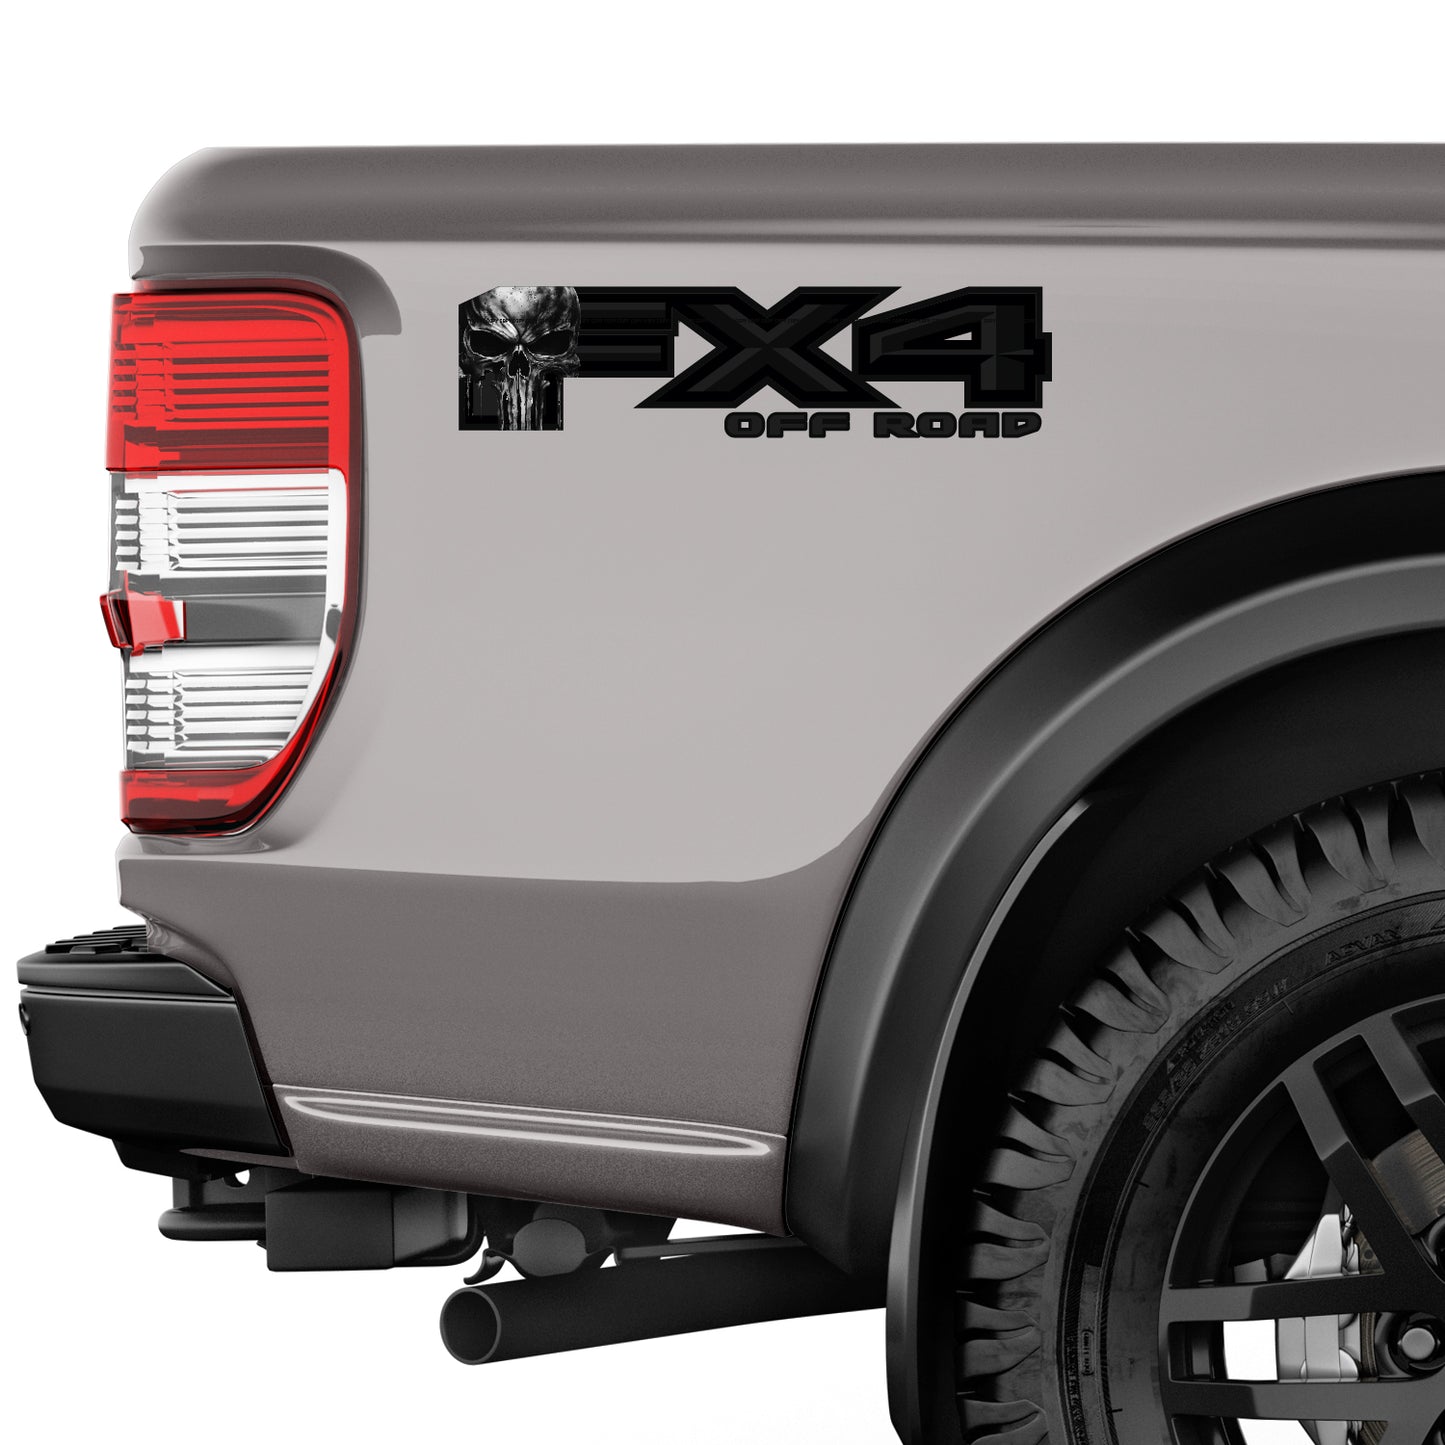 FX4 Off Road Skull Decal Replacement Sticker Ford F 150 Bedside Emblem for 4x4 Truck Super Duty